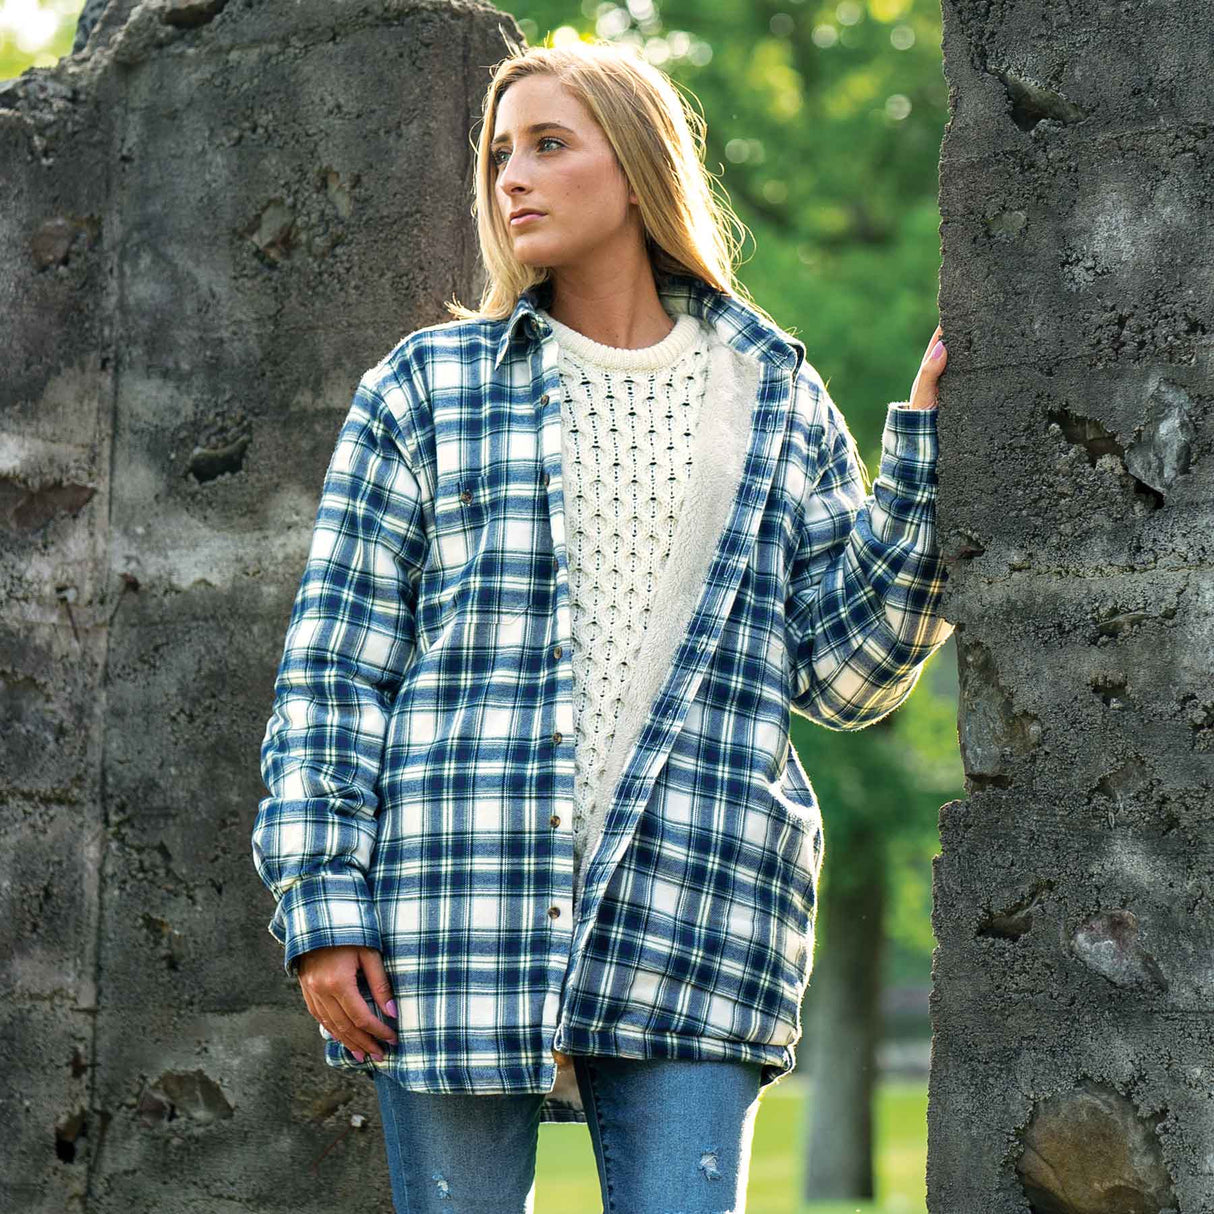 Fuzzy Flannel - Your Favorite Fall Shirt Just Got an Upgrade